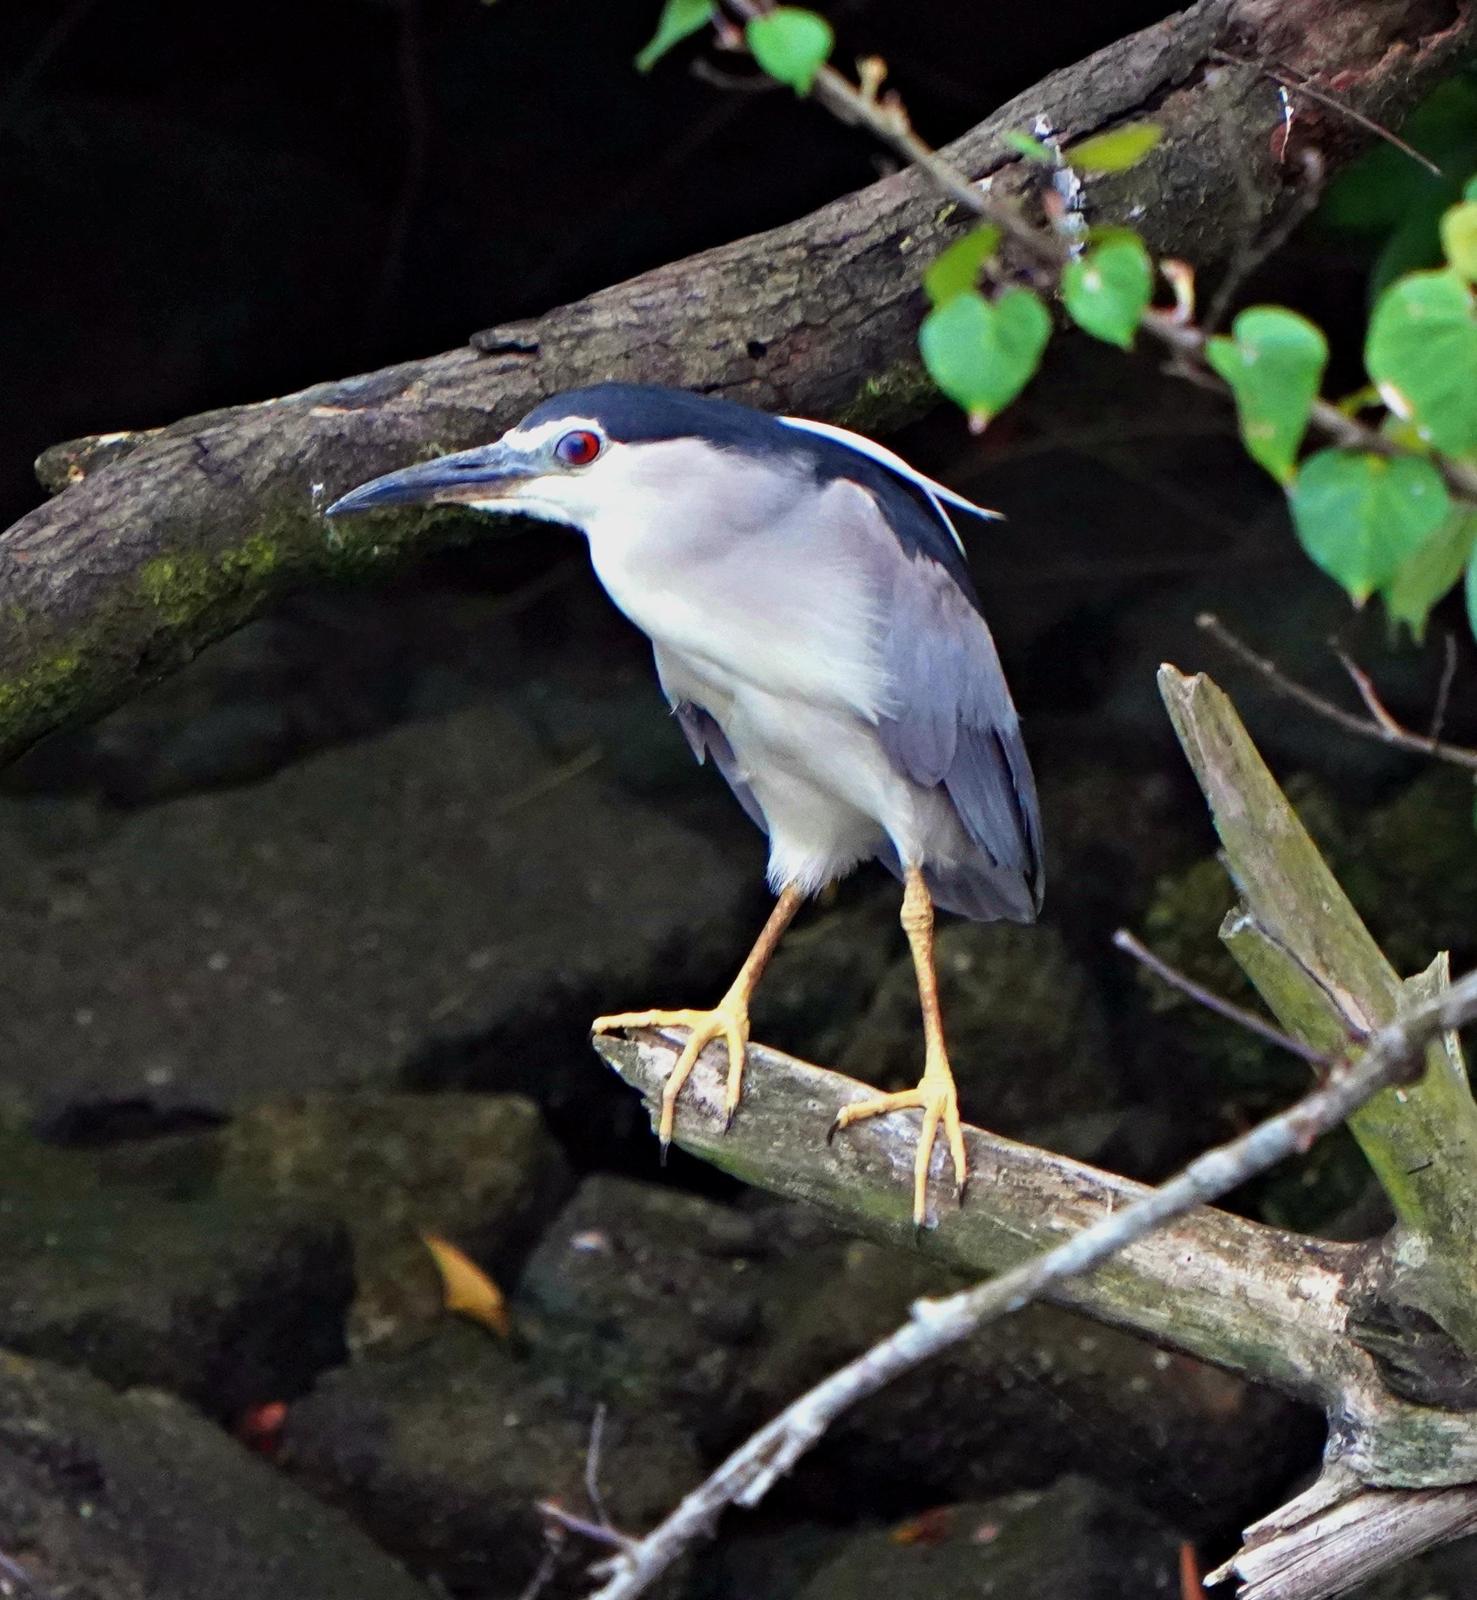 Black-crowned Night-Heron Photo by Steven Cheong